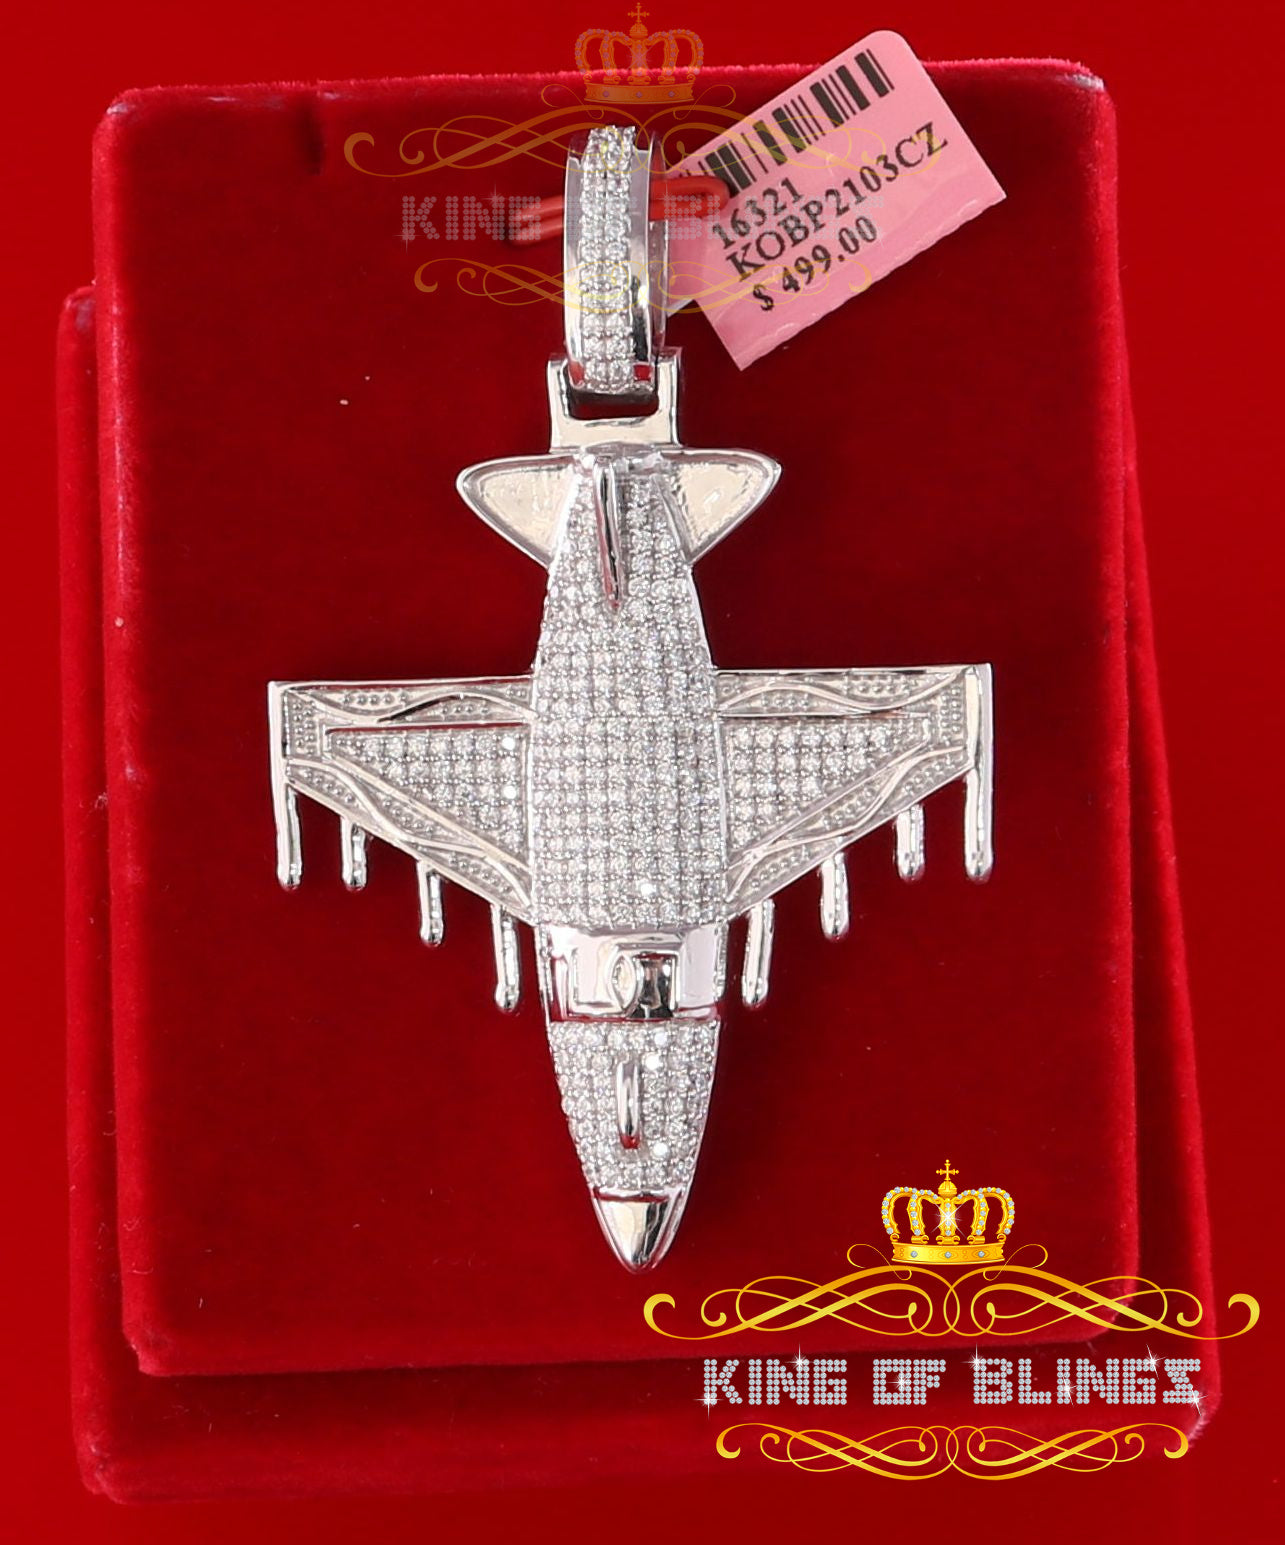 White 925 Sterling Silver AIROPLANE Shape Charm Pendant 2.45ct Cubic Zirconia KING OF BLINGS